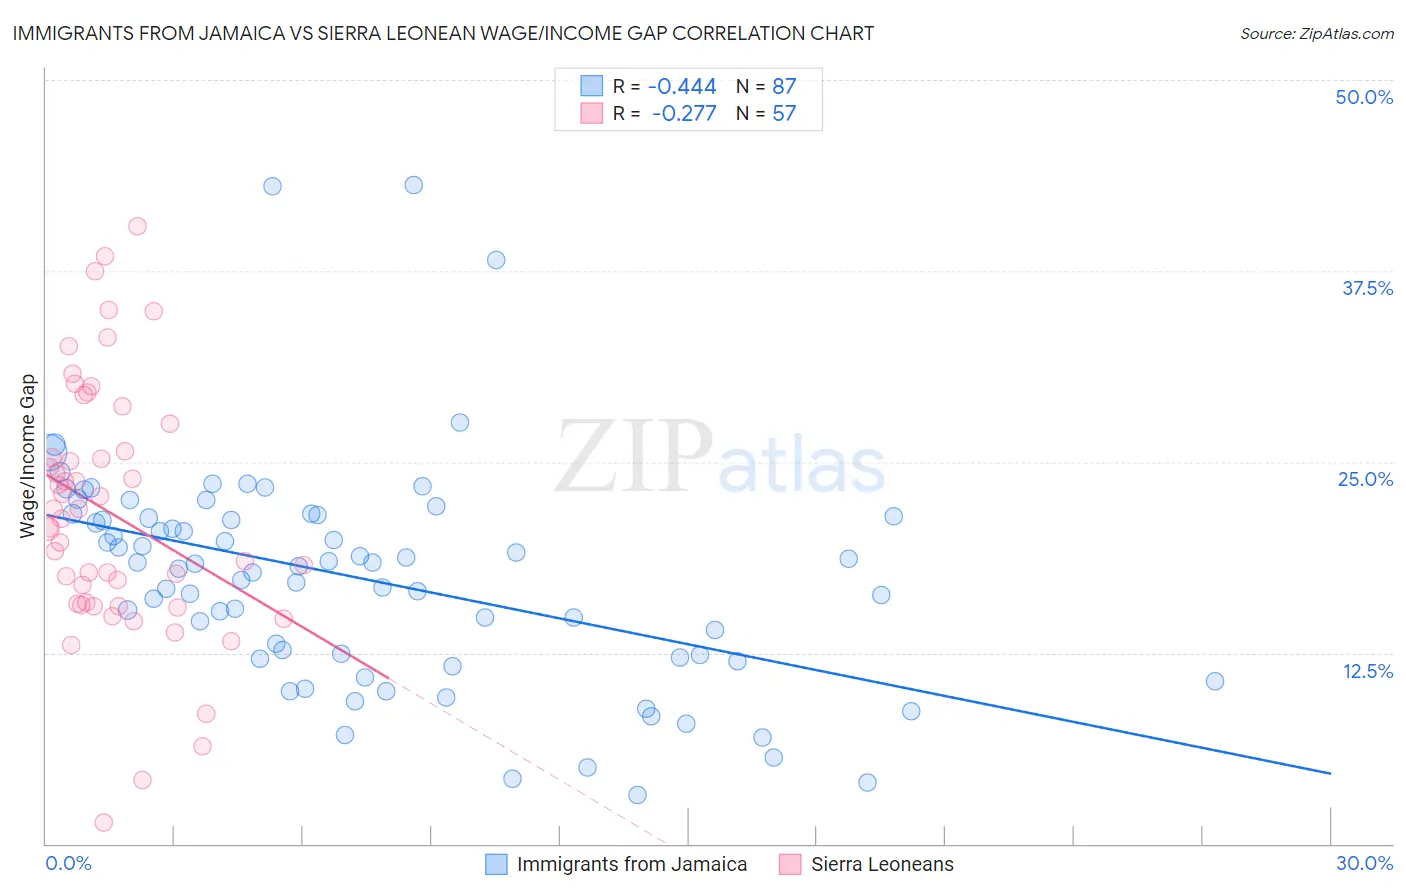 Immigrants from Jamaica vs Sierra Leonean Wage/Income Gap